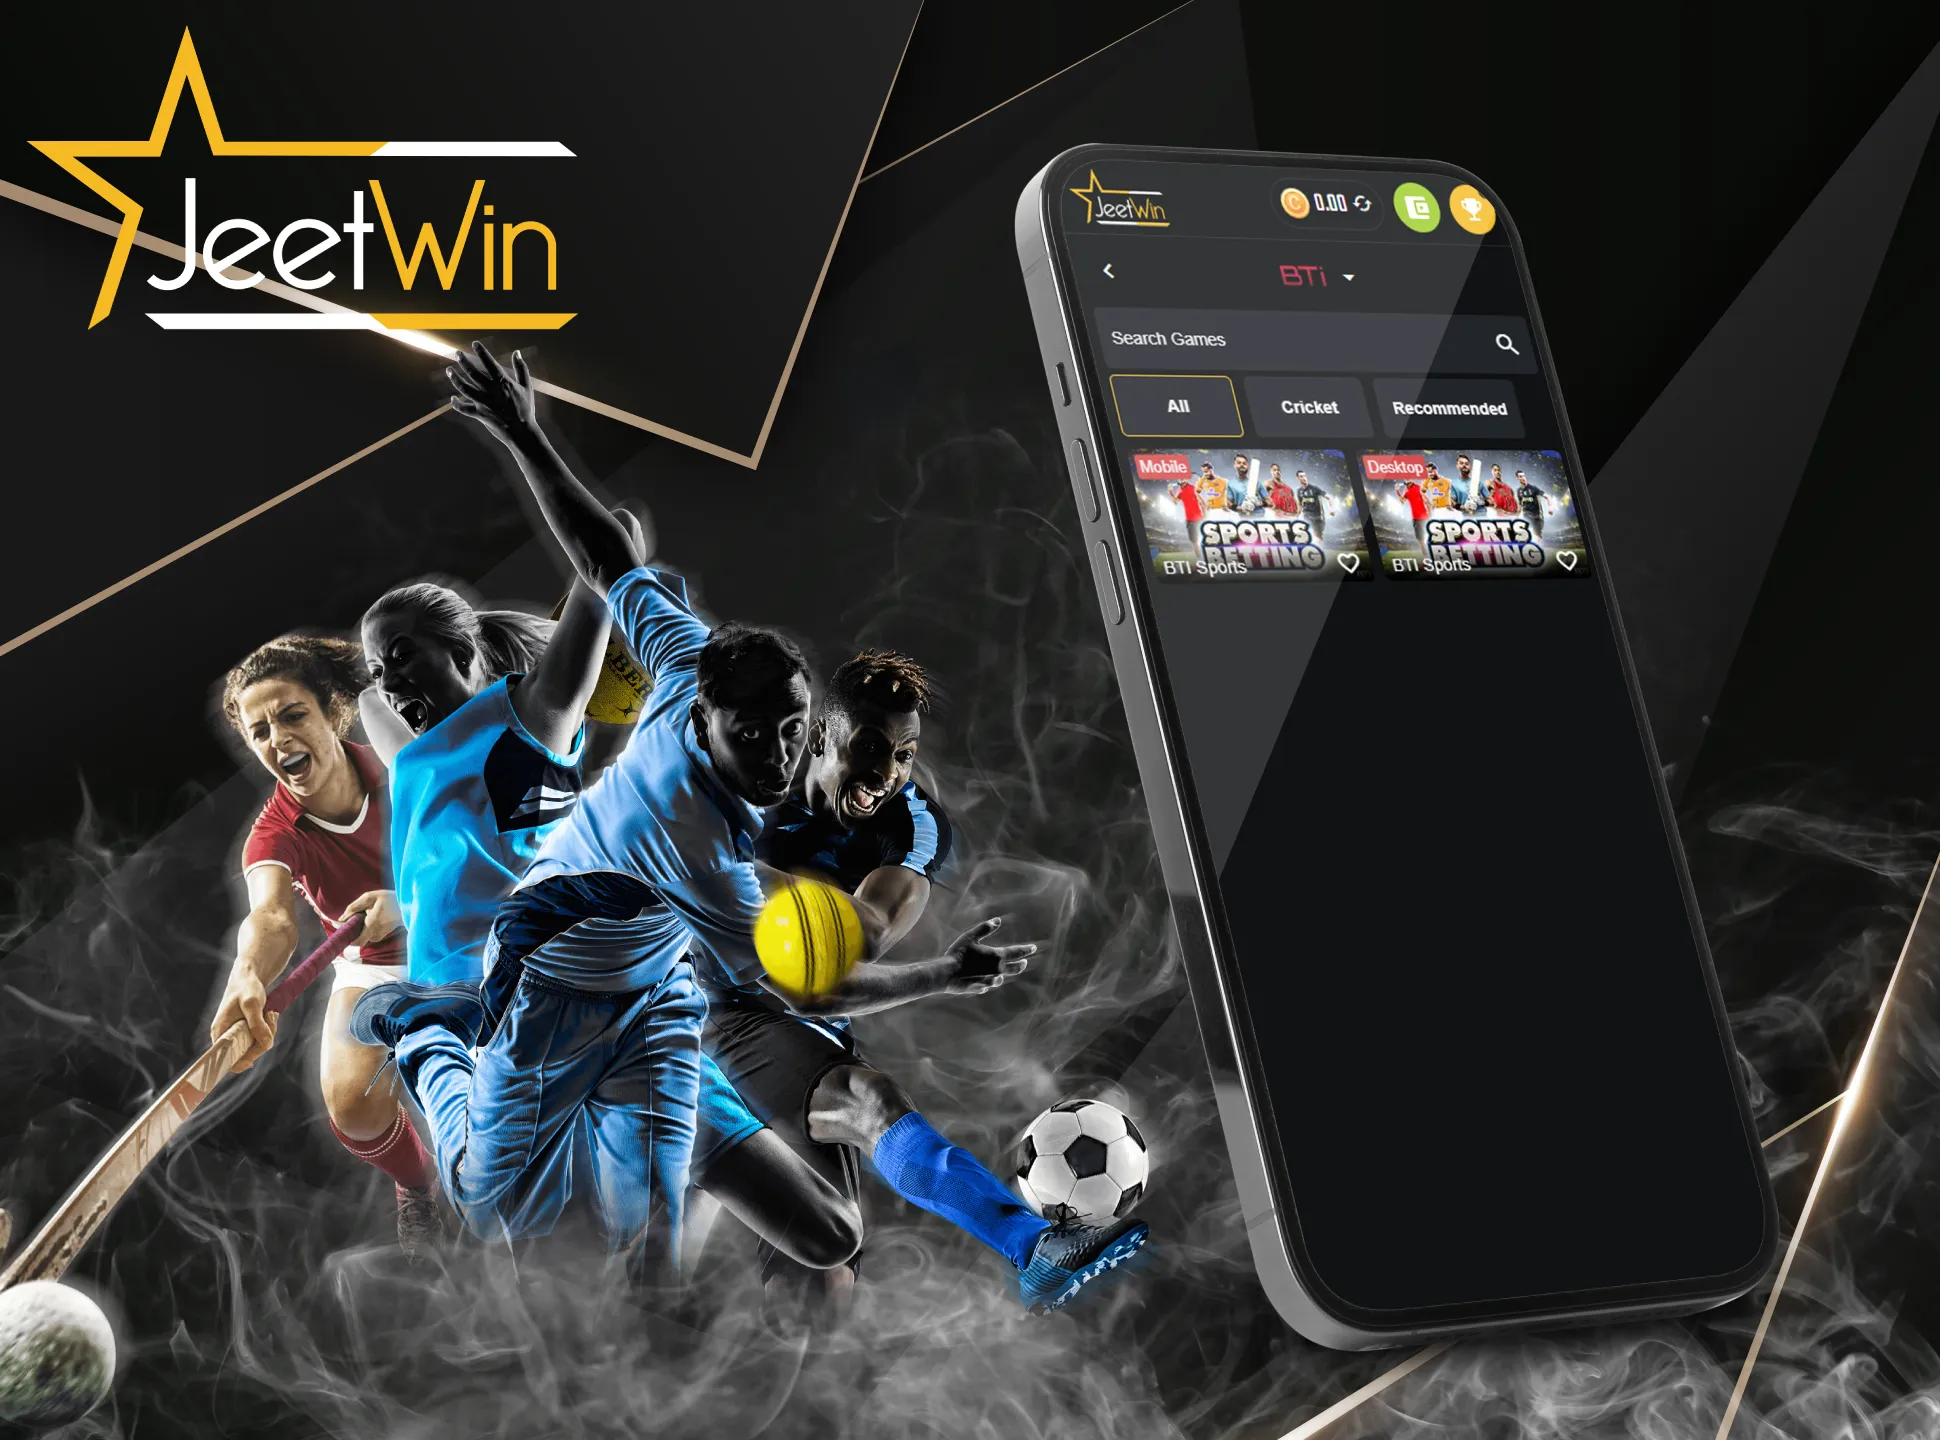 JeetWin provides a wide range of tournaments for sports betting.